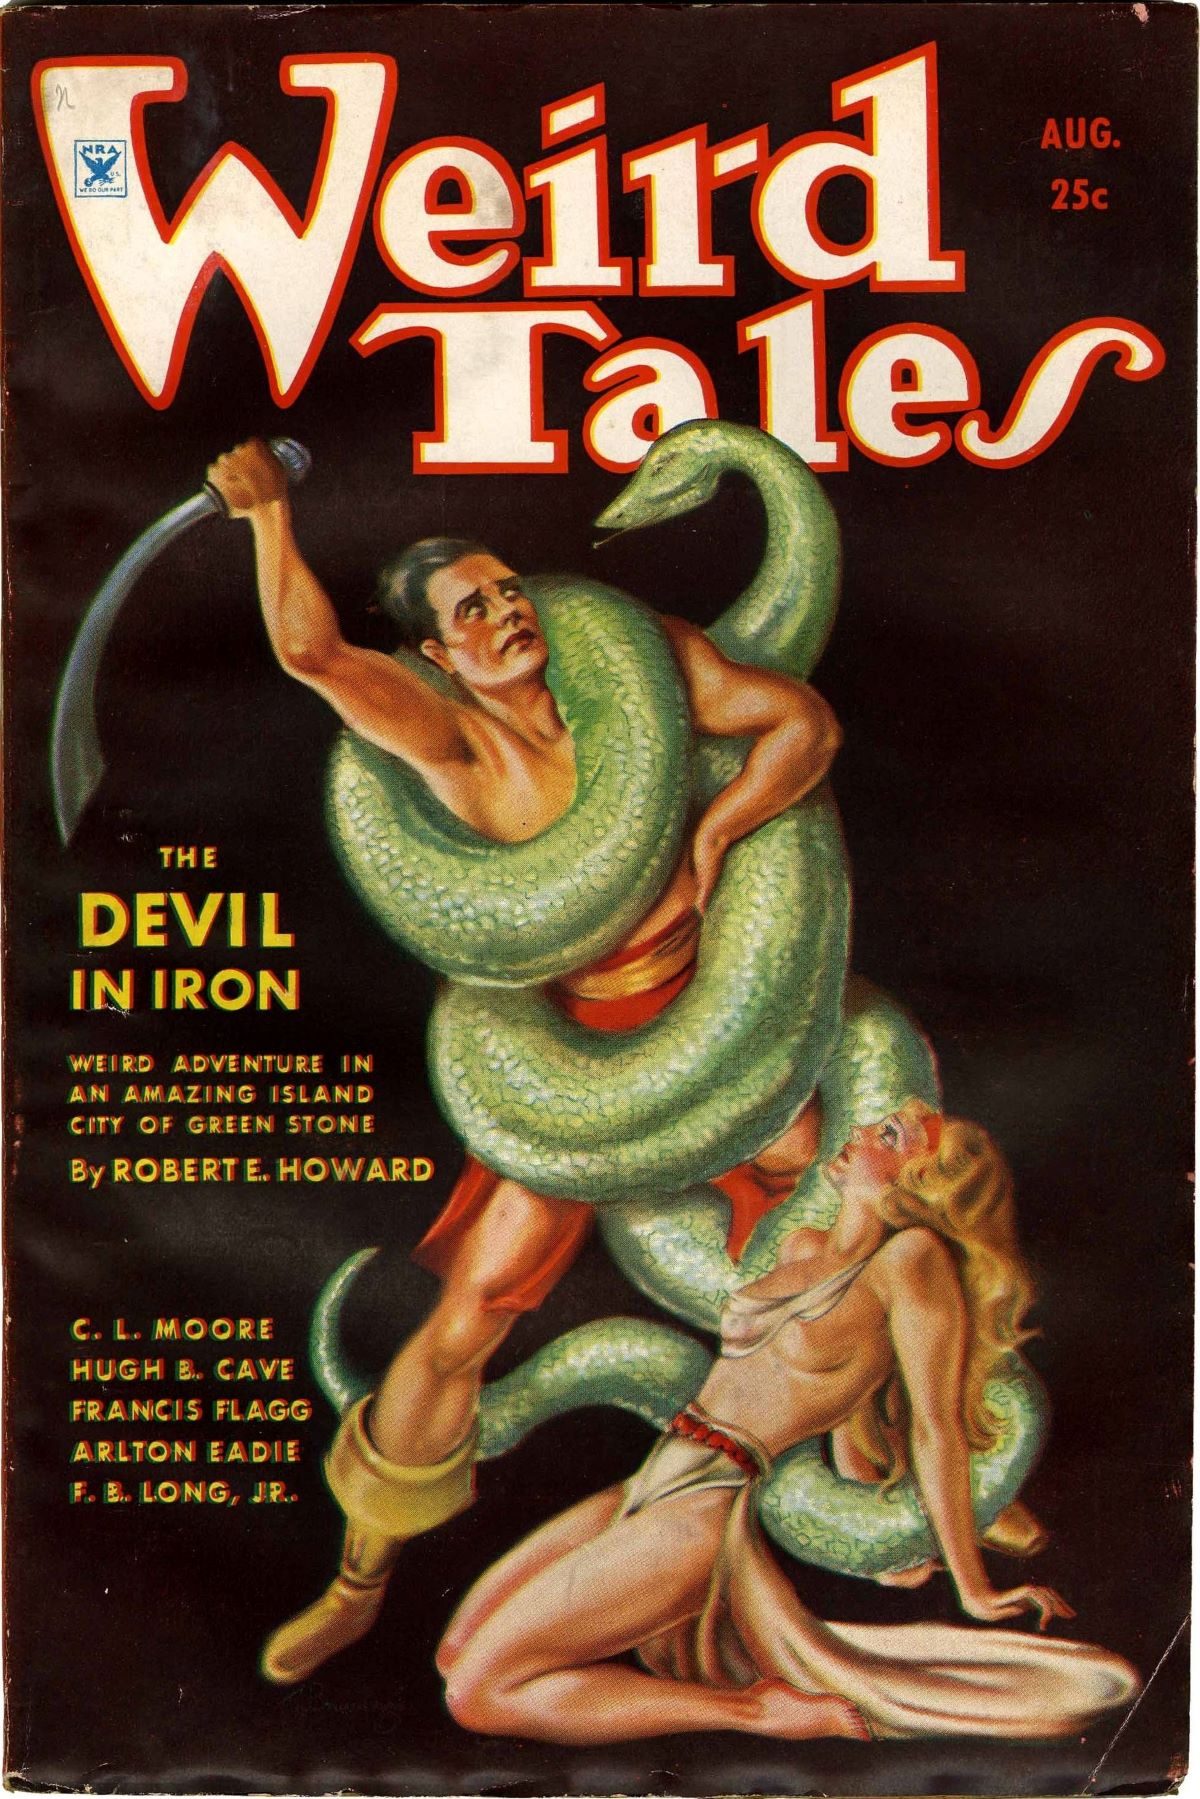 Weird Tales, artwork, covers horror magazine, writers, stories, occult, fiction, 1920s, 1930s, 1940s